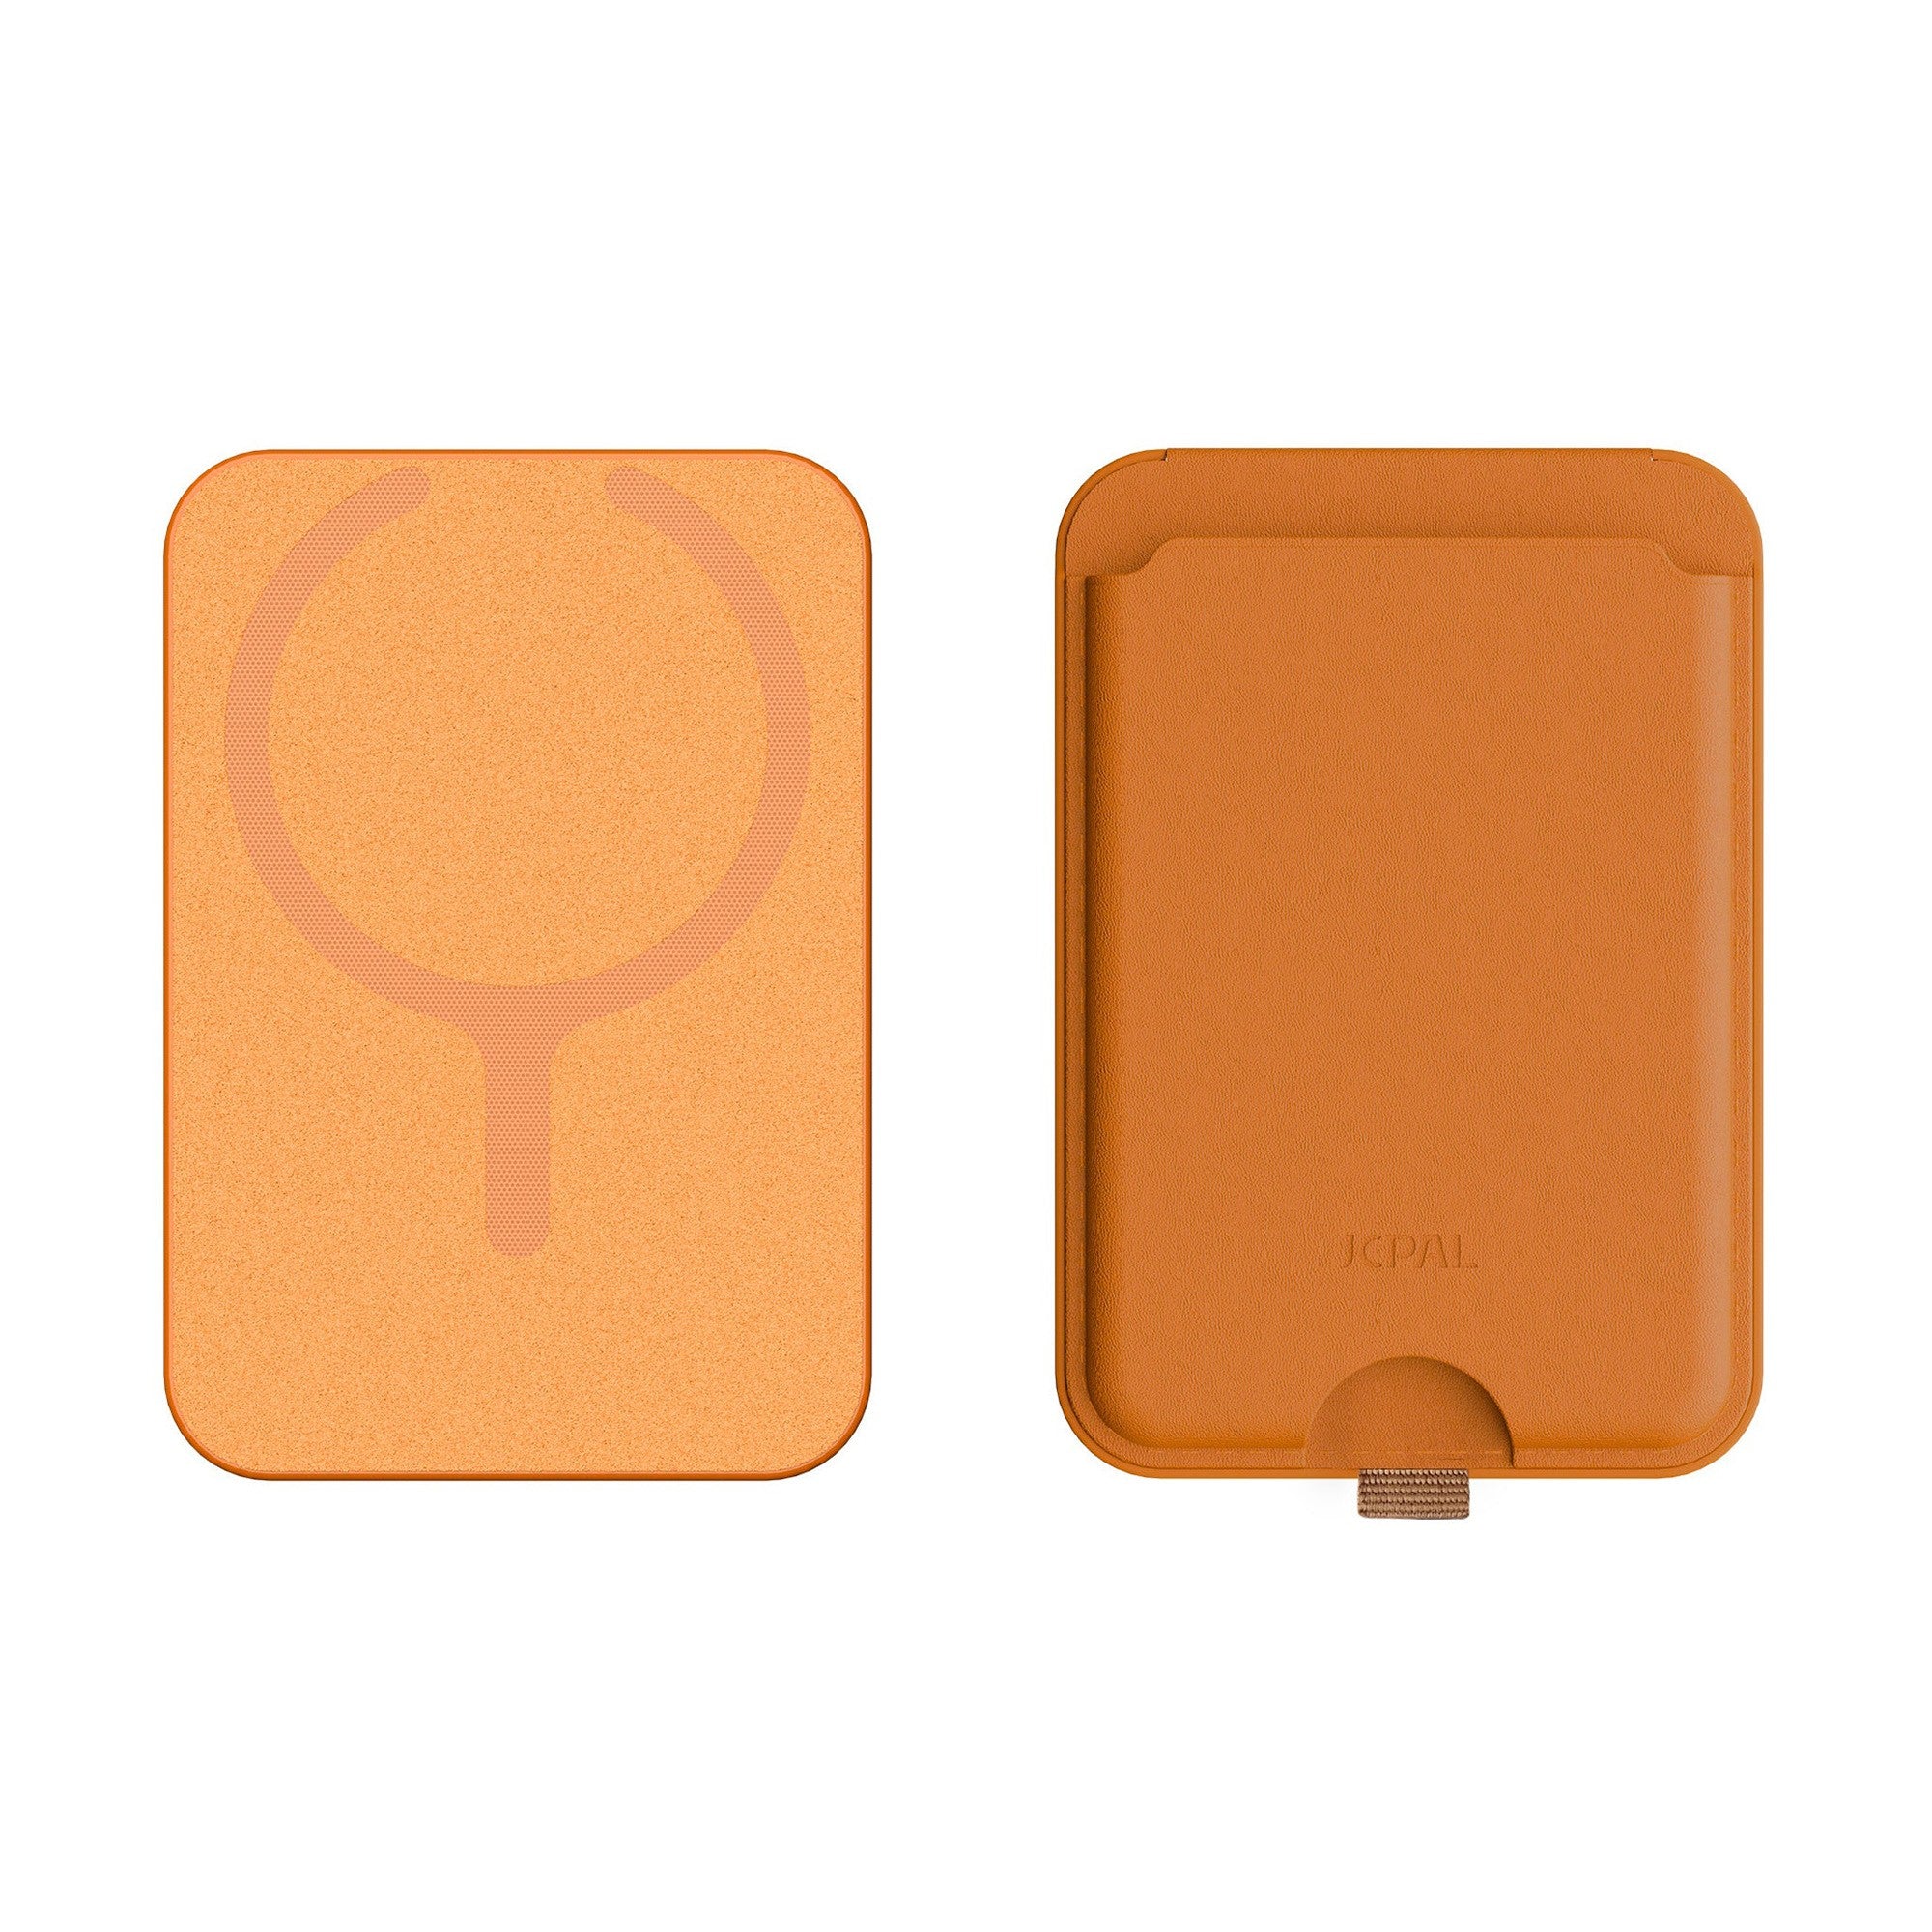 Universal JCPal Cove MagSafe Wallet Stand - Tan - 15-11950